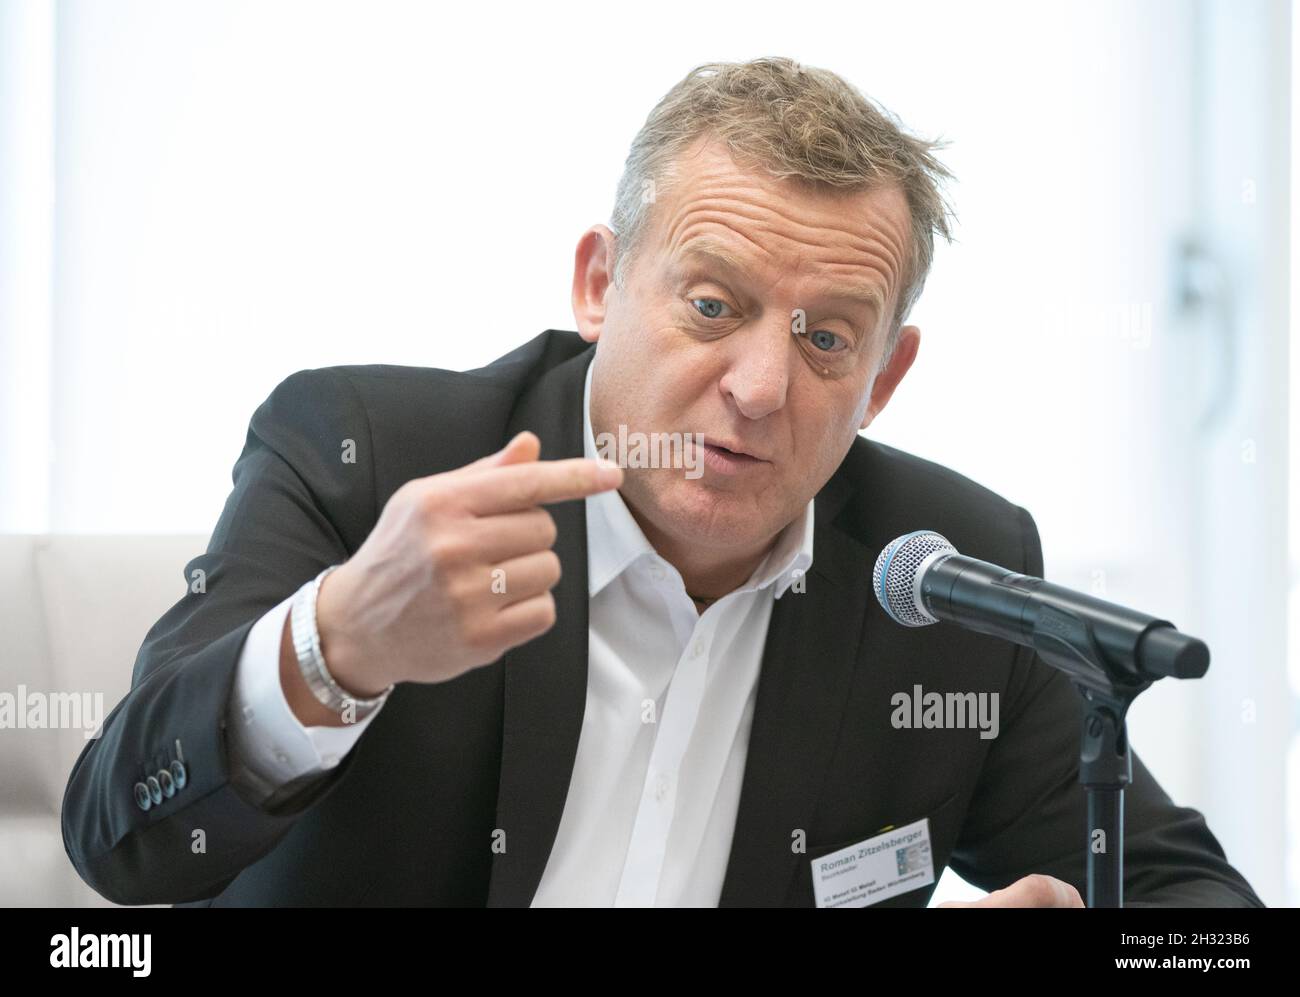 Stuttgart, Germany. 25th Oct, 2021. Roman Zitzelsberger, District Manager Baden-Württemberg of the IG Metall trade union, speaks at a press conference on the subject of 'Future Skills' on the occasion of the theme day with the topic 'Future Skills'. Credit: Bernd Weißbrod/dpa/Alamy Live News Stock Photo